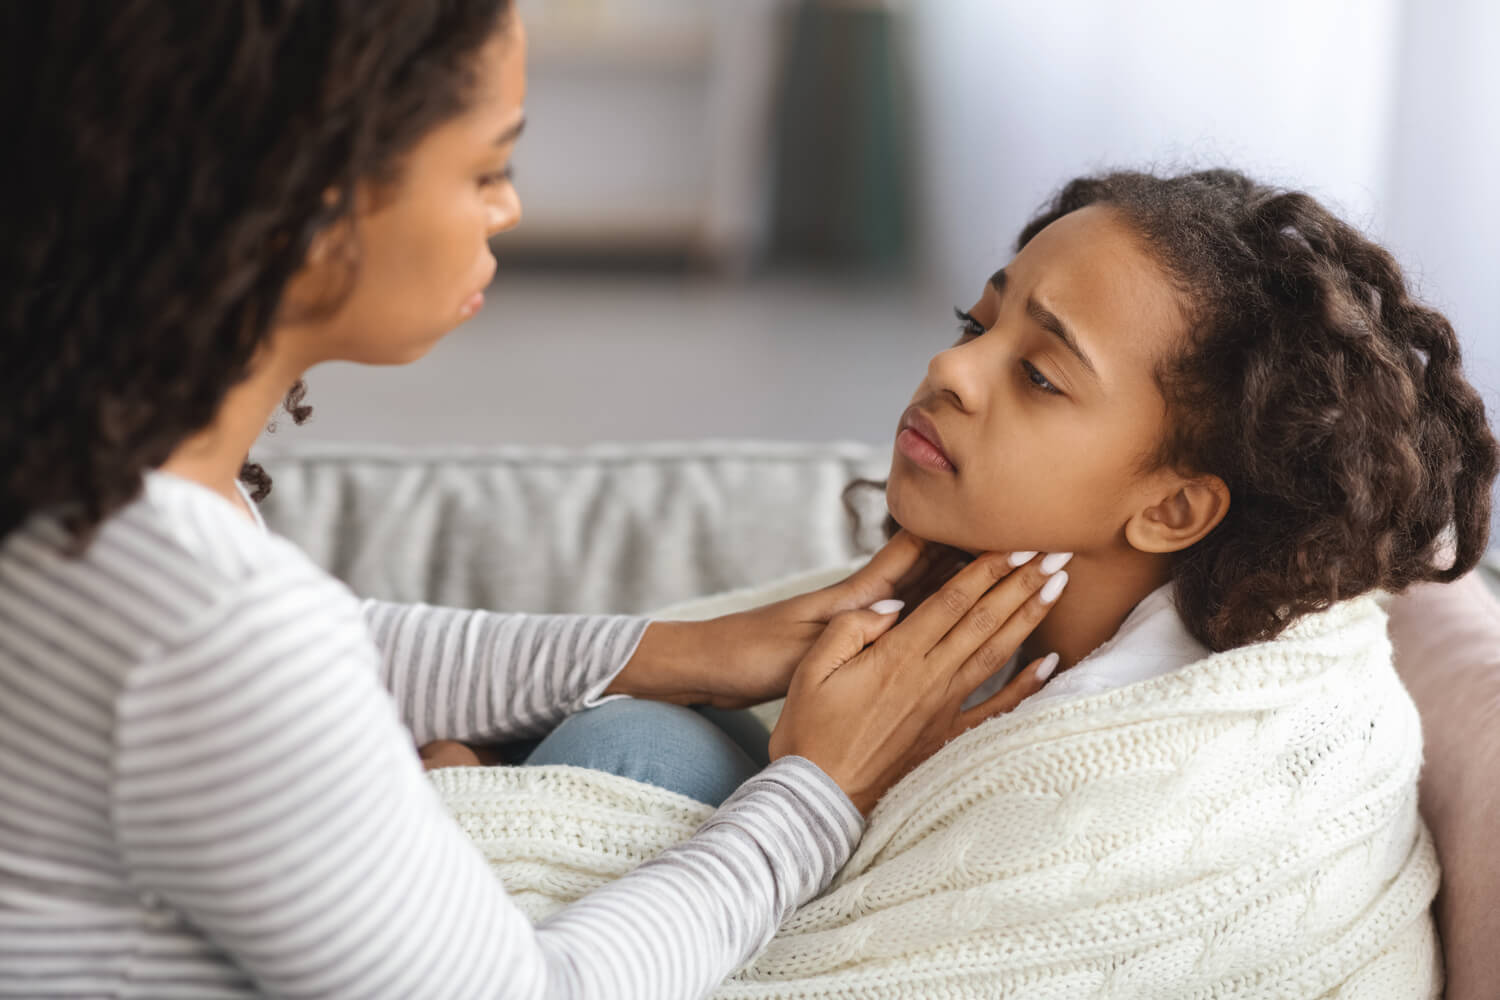 How Can I Help My Child Deal With Throat Infection